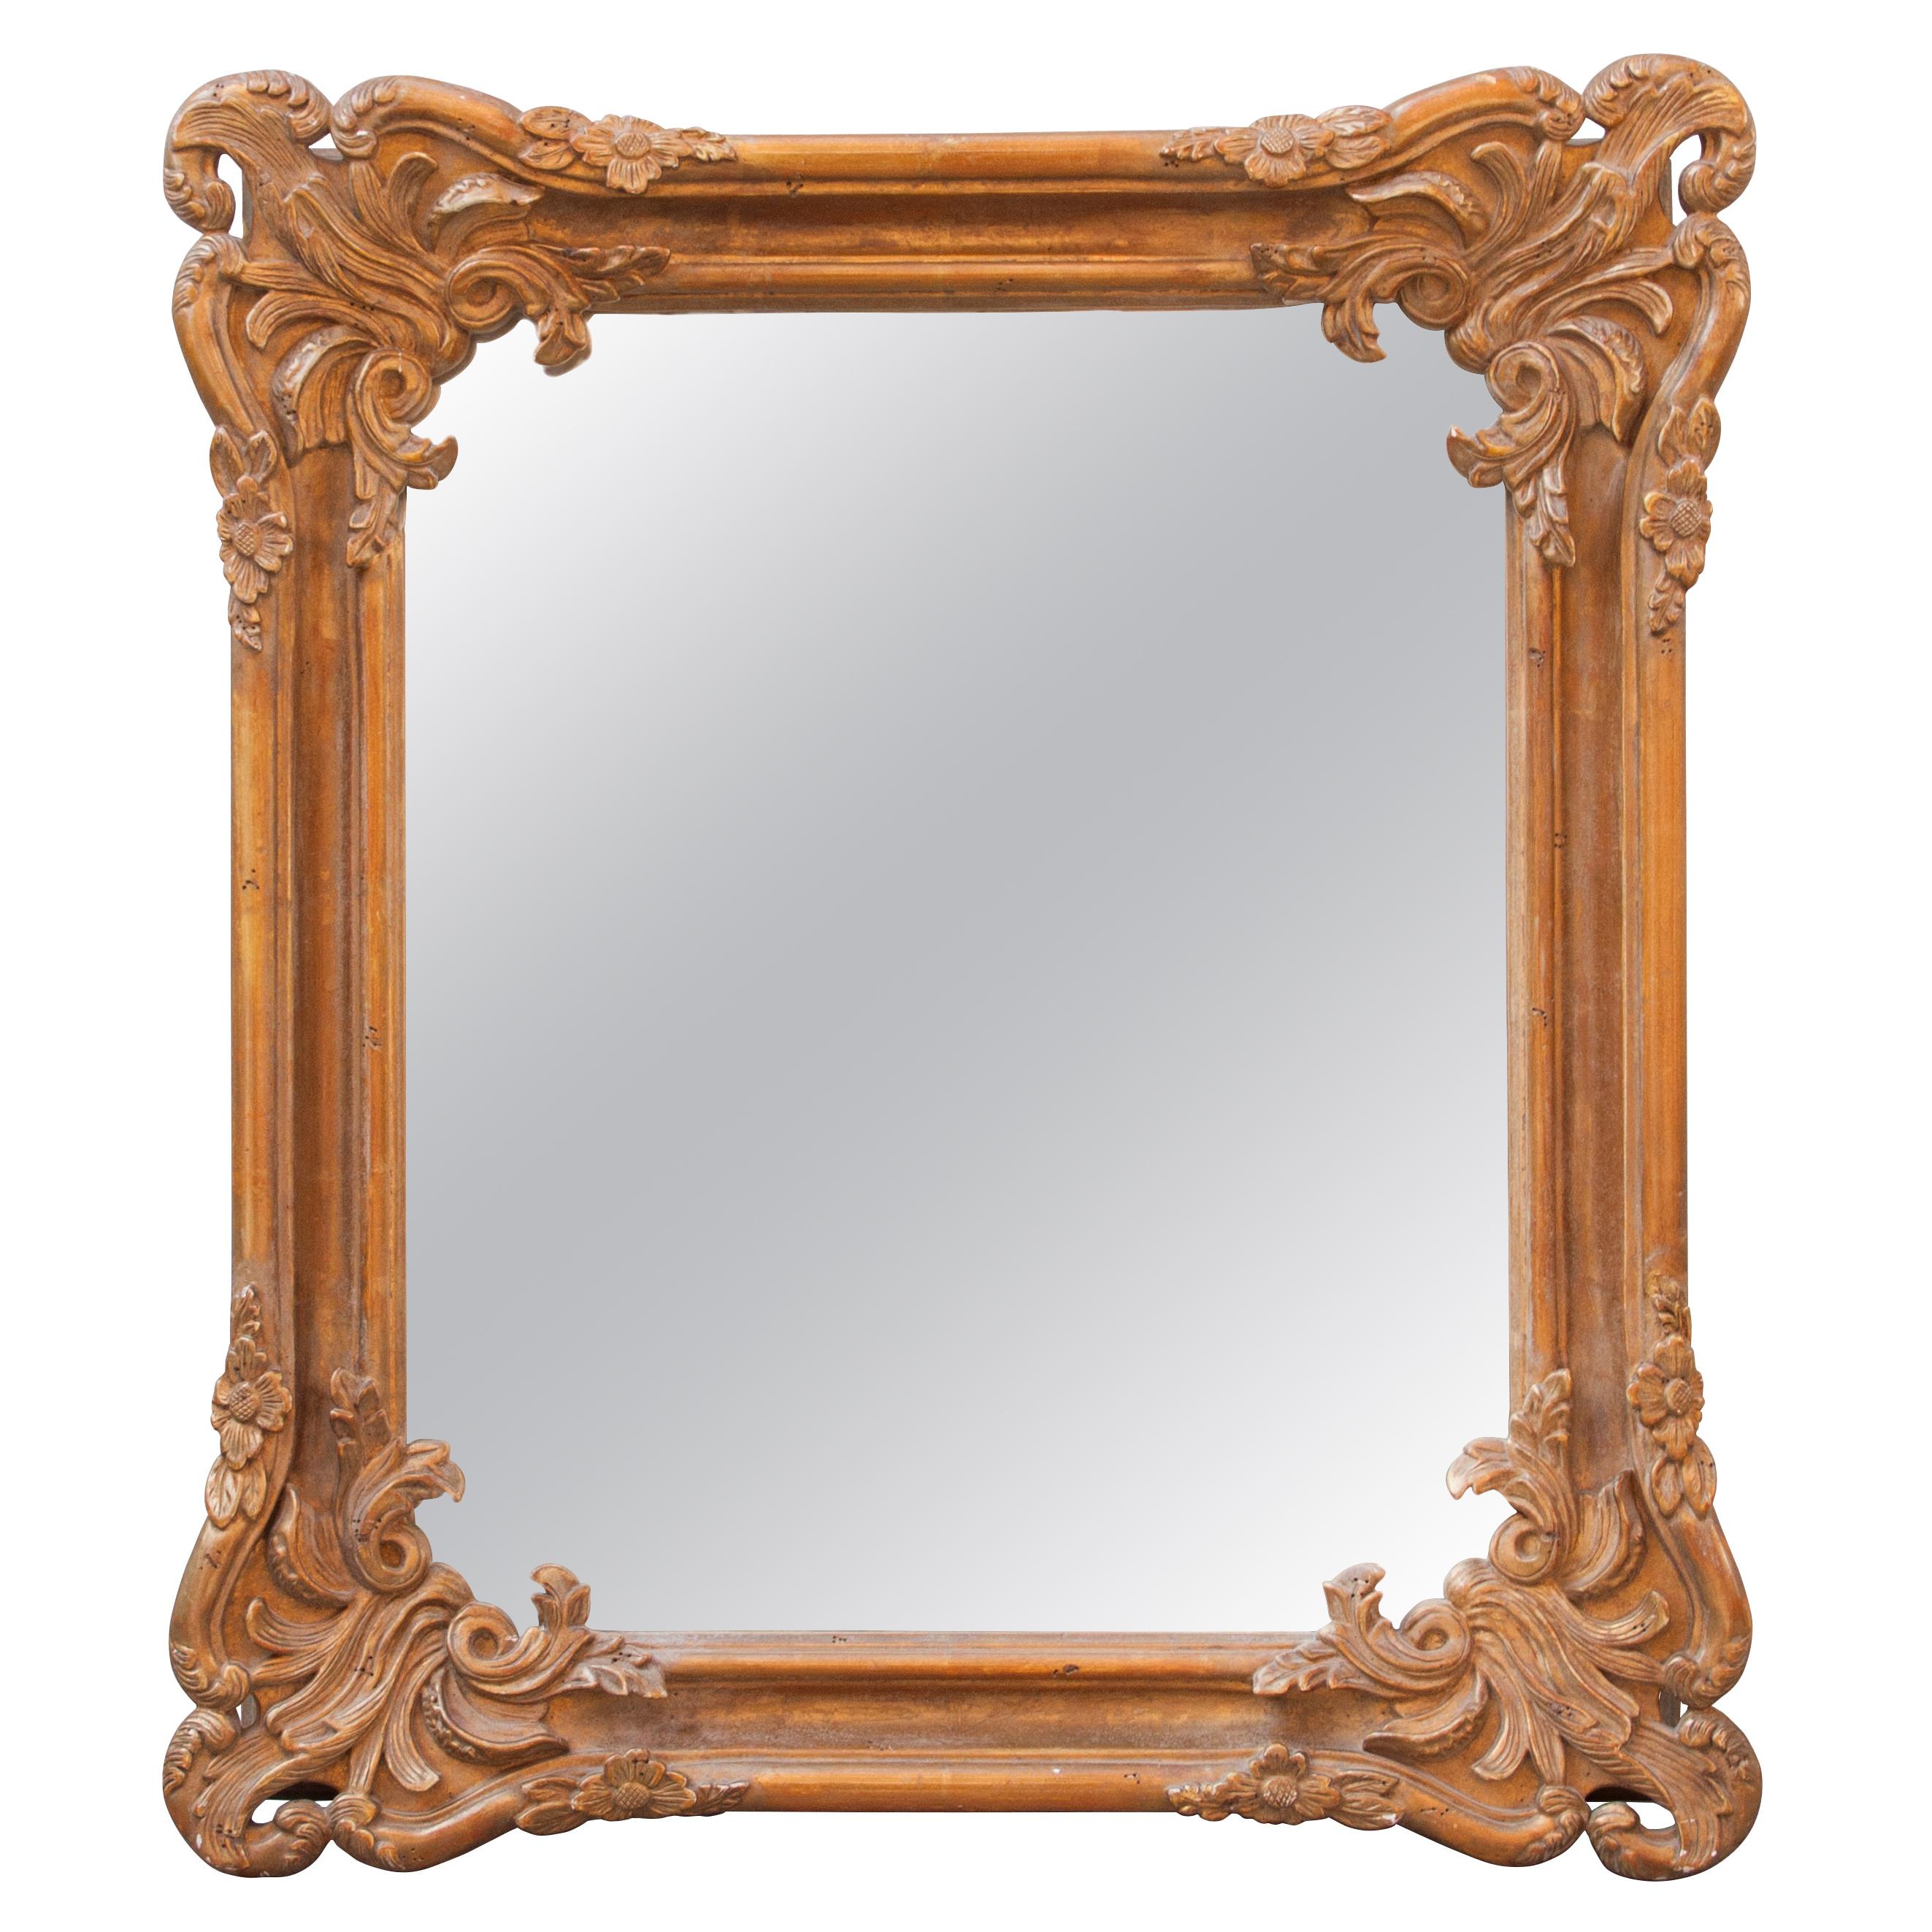 Neoclassical Empire Rectangular Gold Hand Carved Wooden Mirror, Spain, 1970 For Sale